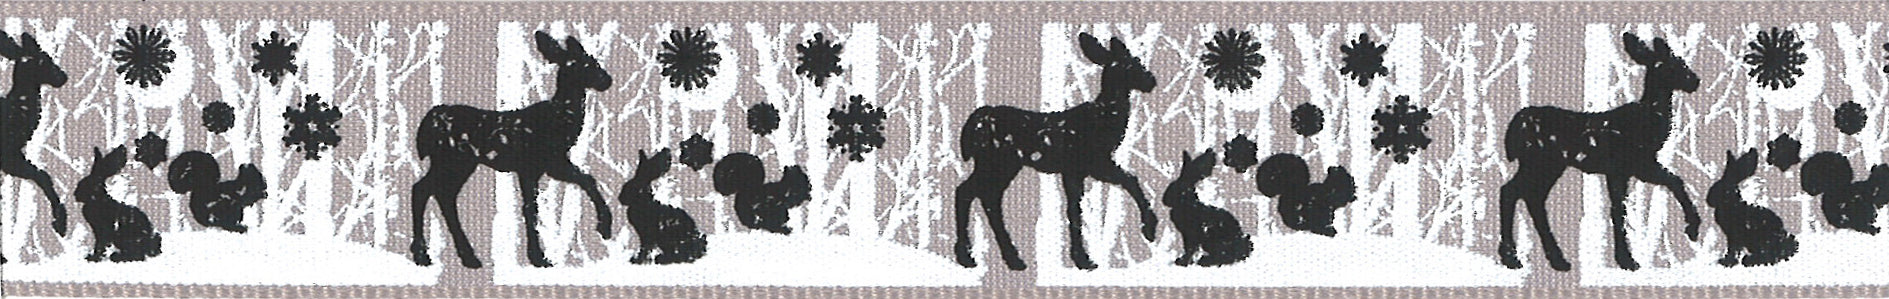 Berisfords Woven Ribbon with Woodland Animals - Silver Grey 25mm